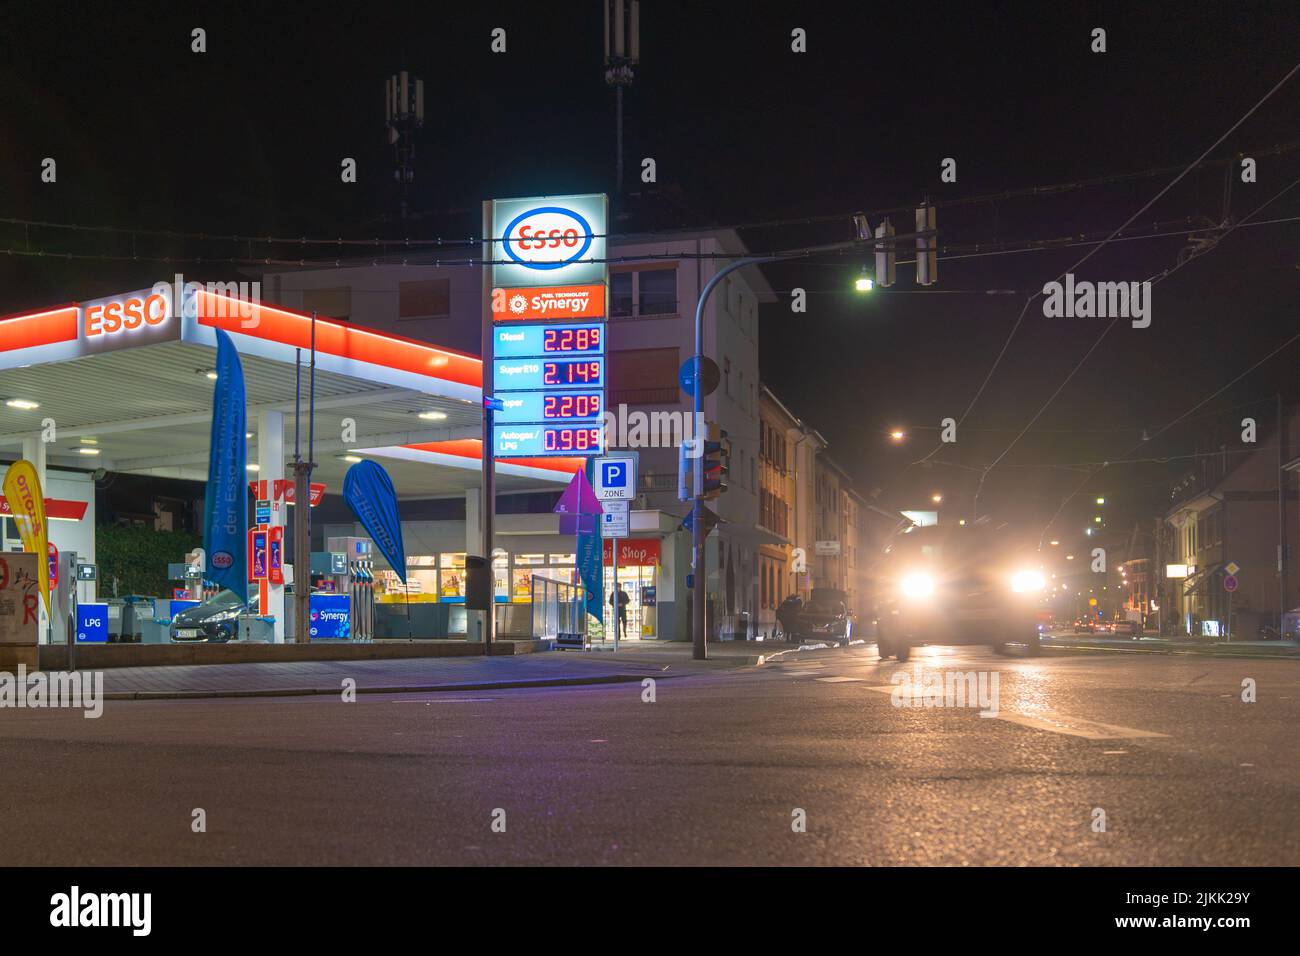 A shot of Esso gas station illuminated by traffic lights at night in Heidelberg, Germany Stock Photo